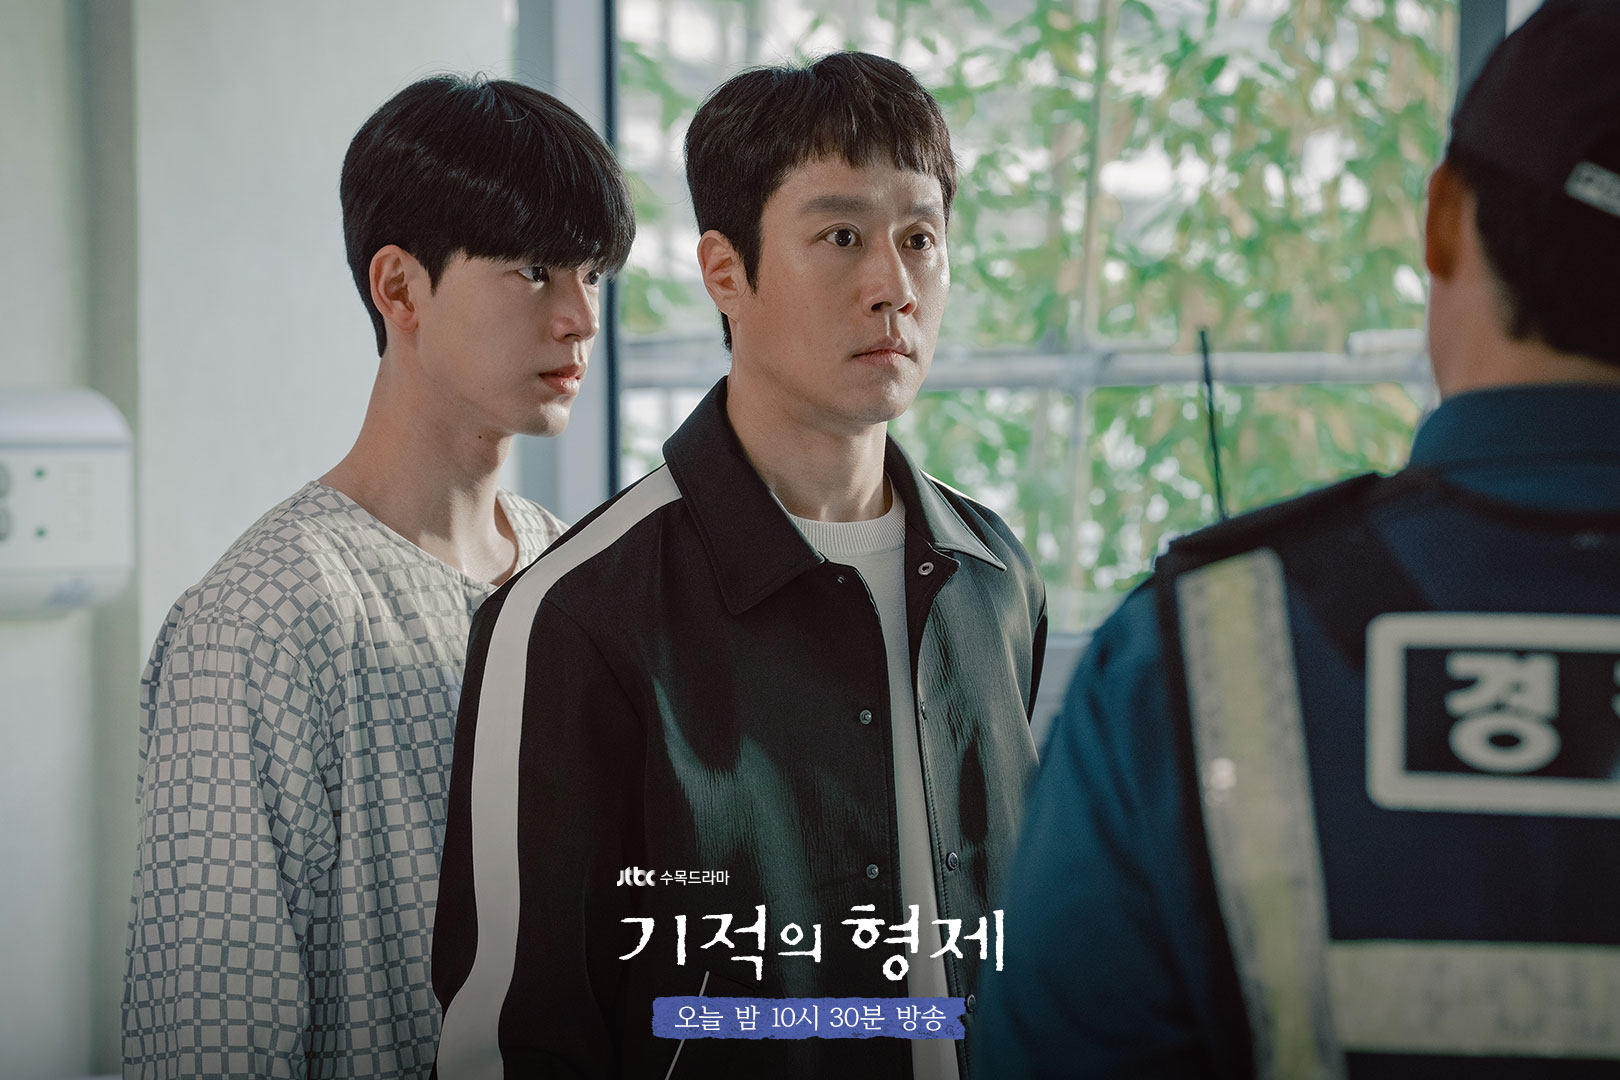 Bae Hyun-sung (left) and Jung Woo in a still from “Miraculous Brothers”.